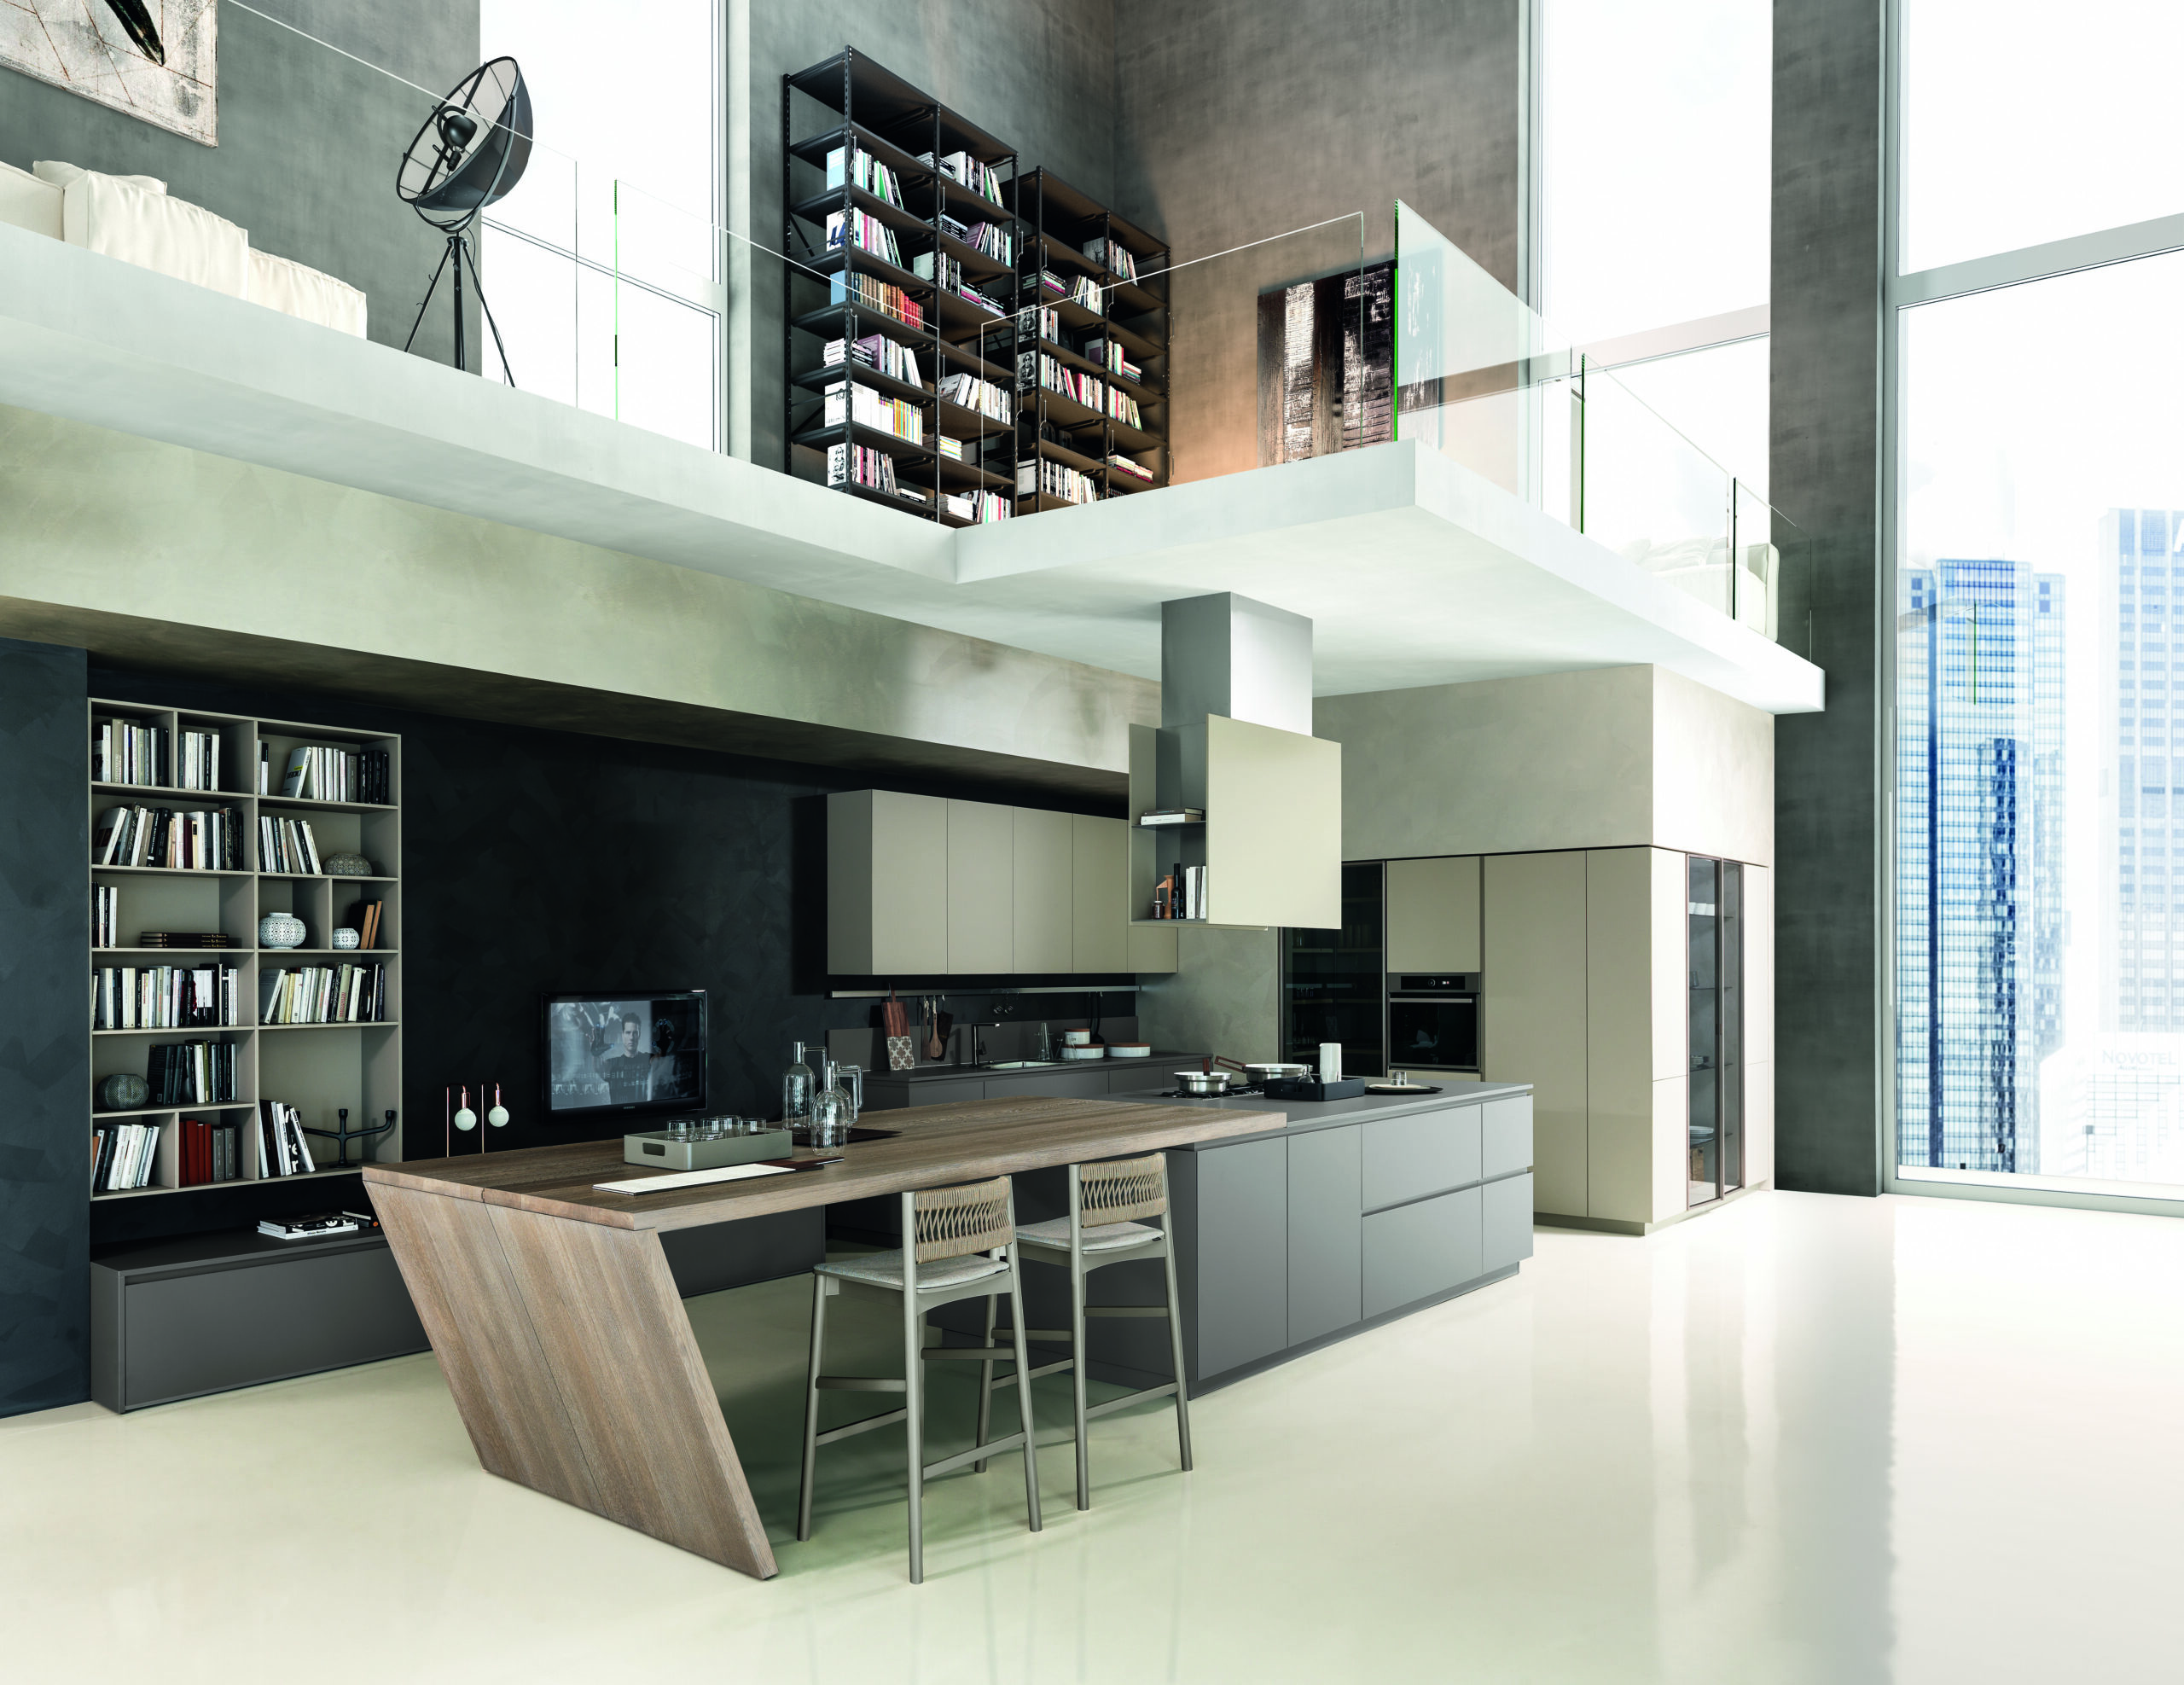 Luxury kitchen with modern cabinets and high-end appliances